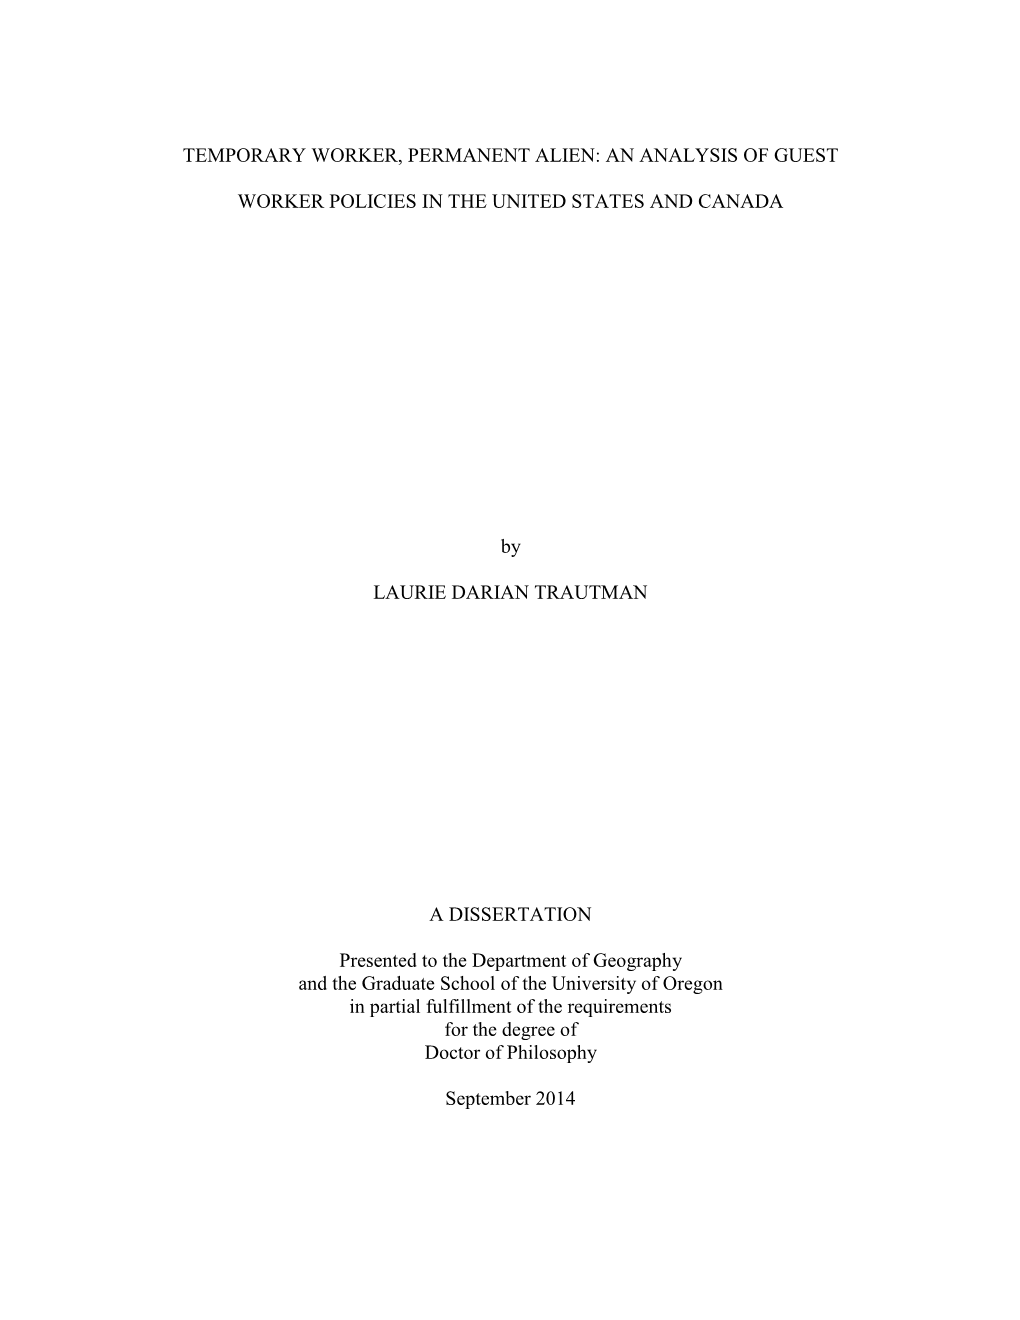 AN ANALYSIS of GUEST WORKER POLICIES in the UNITED STATES and CANADA by LAURIE DARIAN TRAUTMA